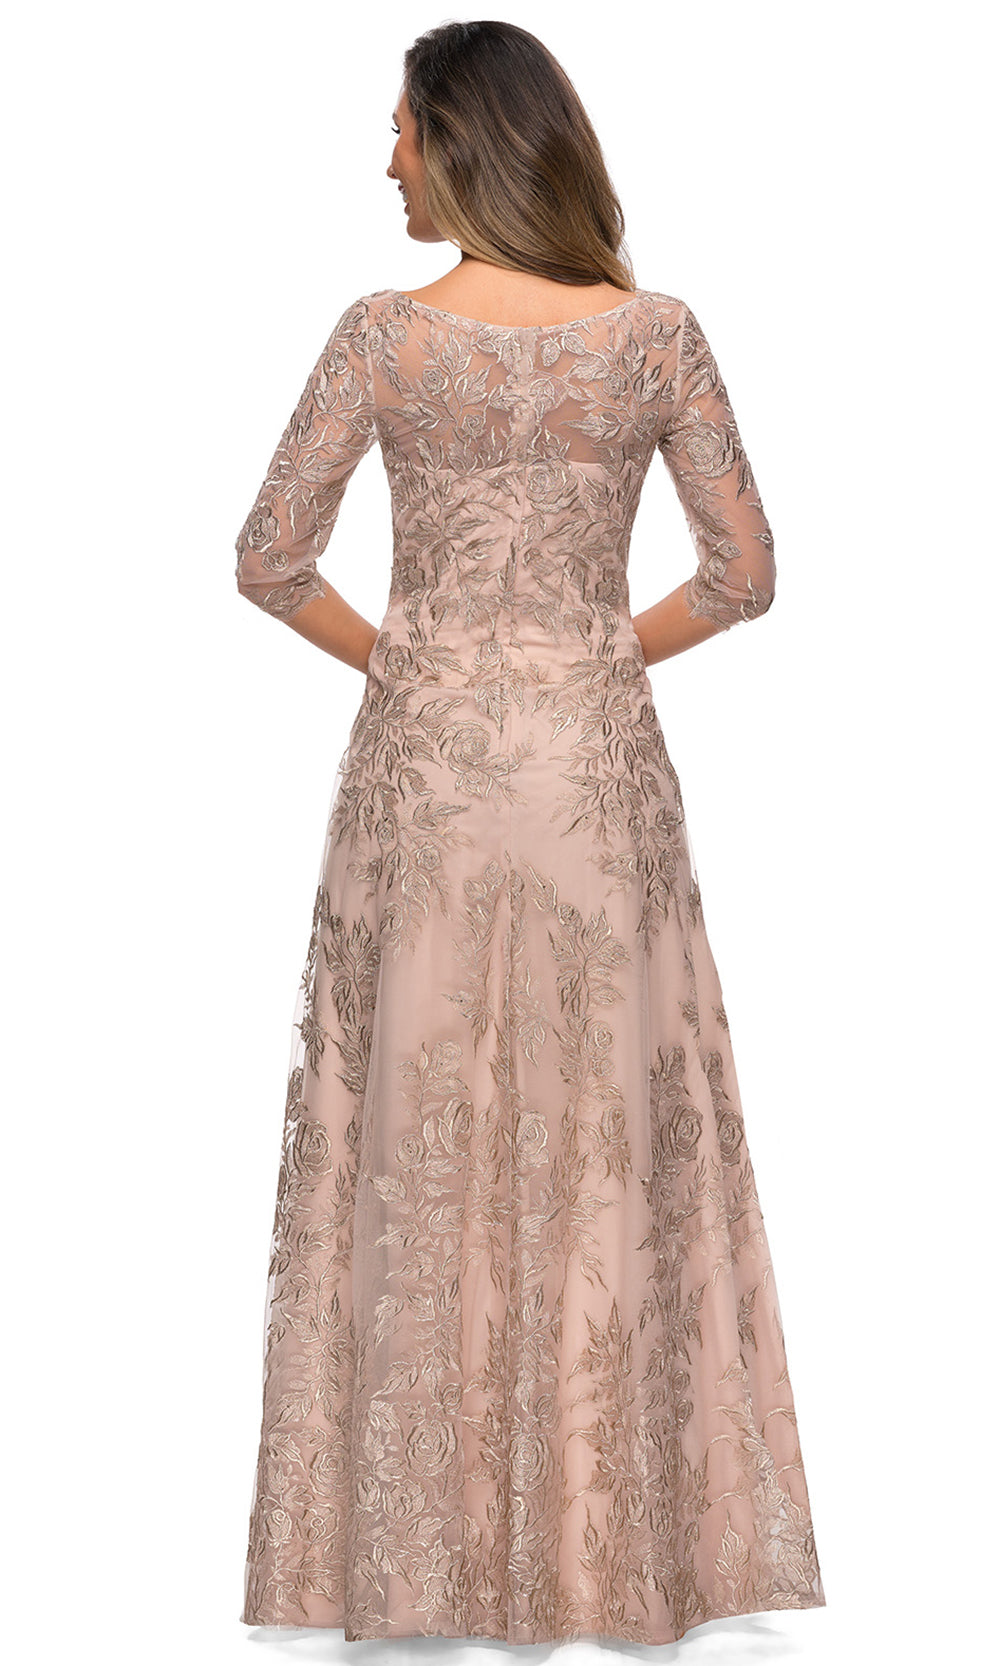 La Femme - 28053 V Neck Lace A-Line Gown In Neutral